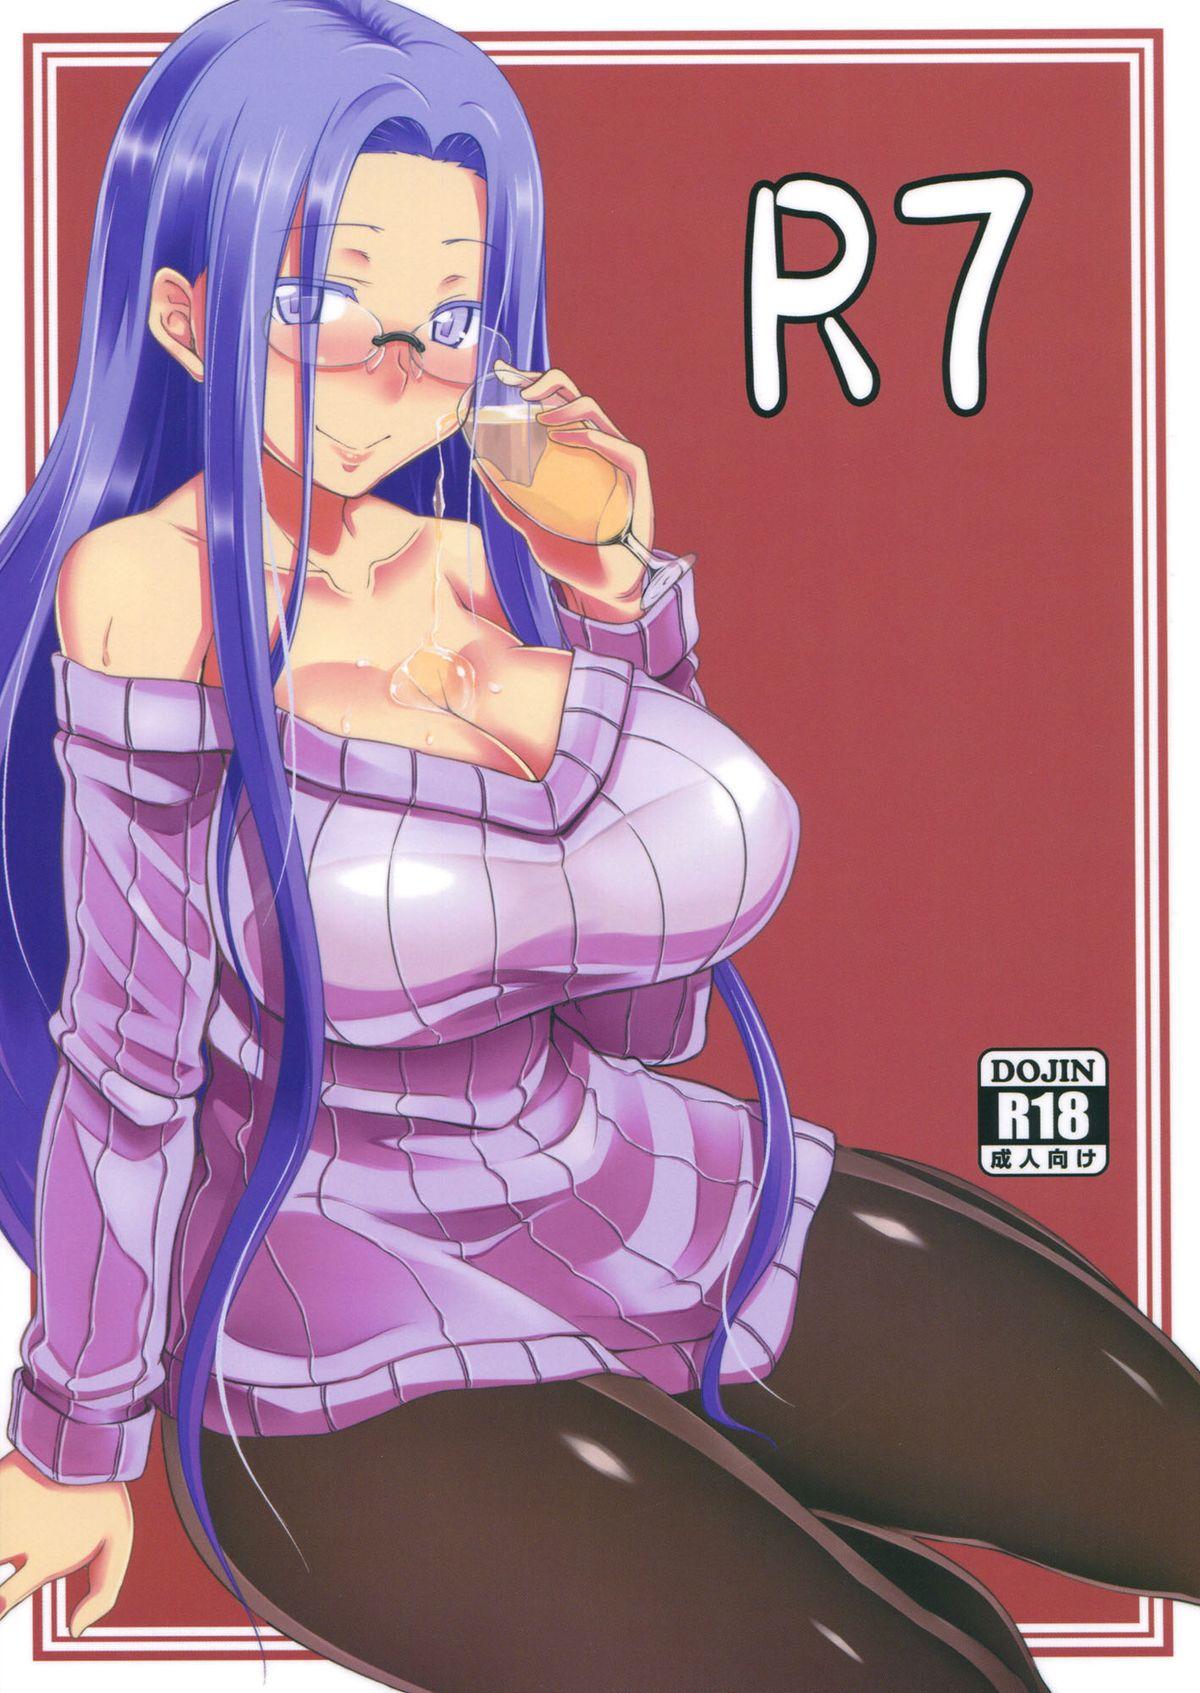 Fuck R7 - Fate stay night Fate hollow ataraxia Vintage - Picture 1